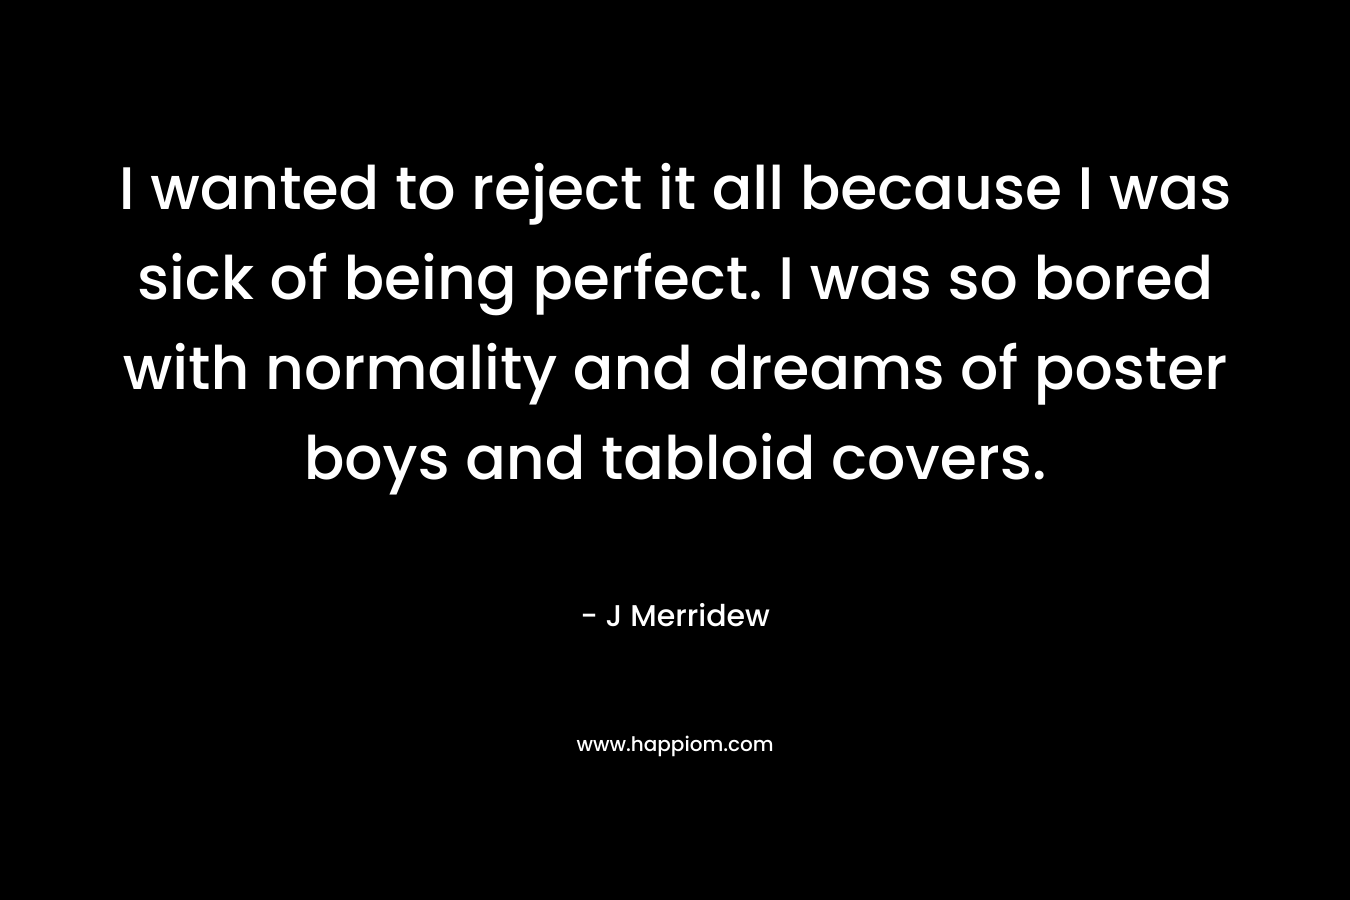 I wanted to reject it all because I was sick of being perfect. I was so bored with normality and dreams of poster boys and tabloid covers. – J Merridew